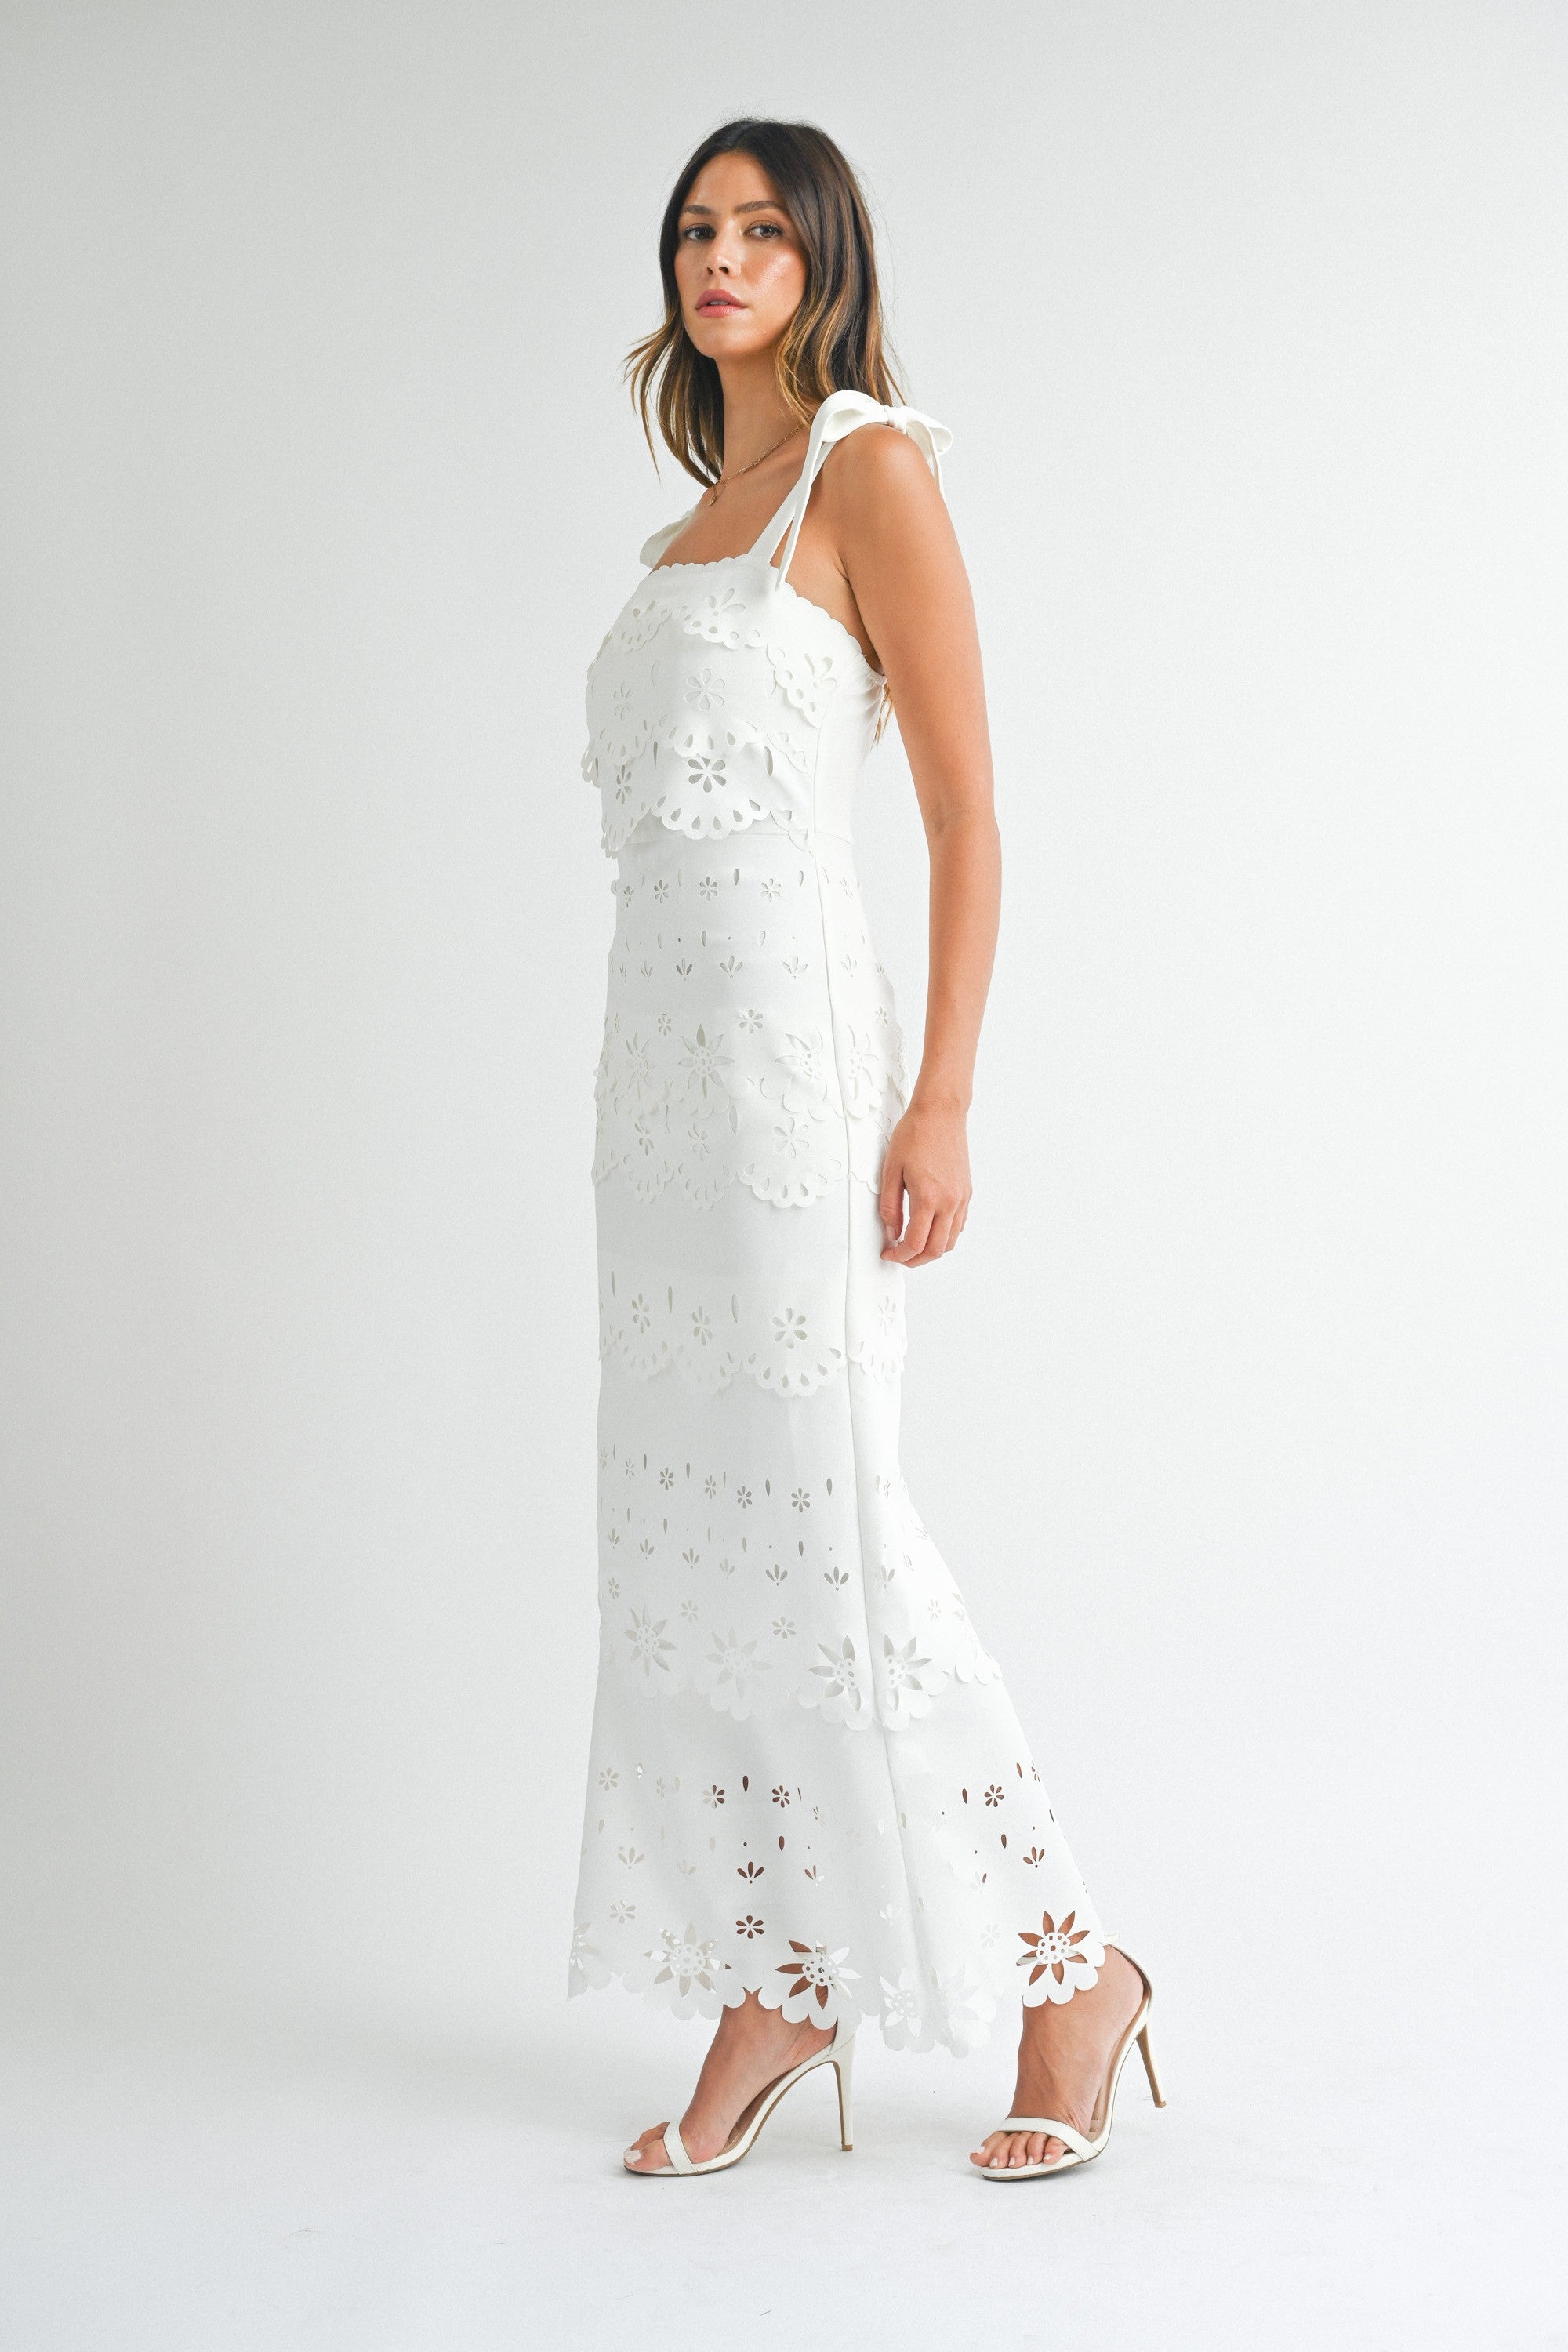 Scallop Laser Cut Maxi Dress with Shoulder Strap | Collective Request 